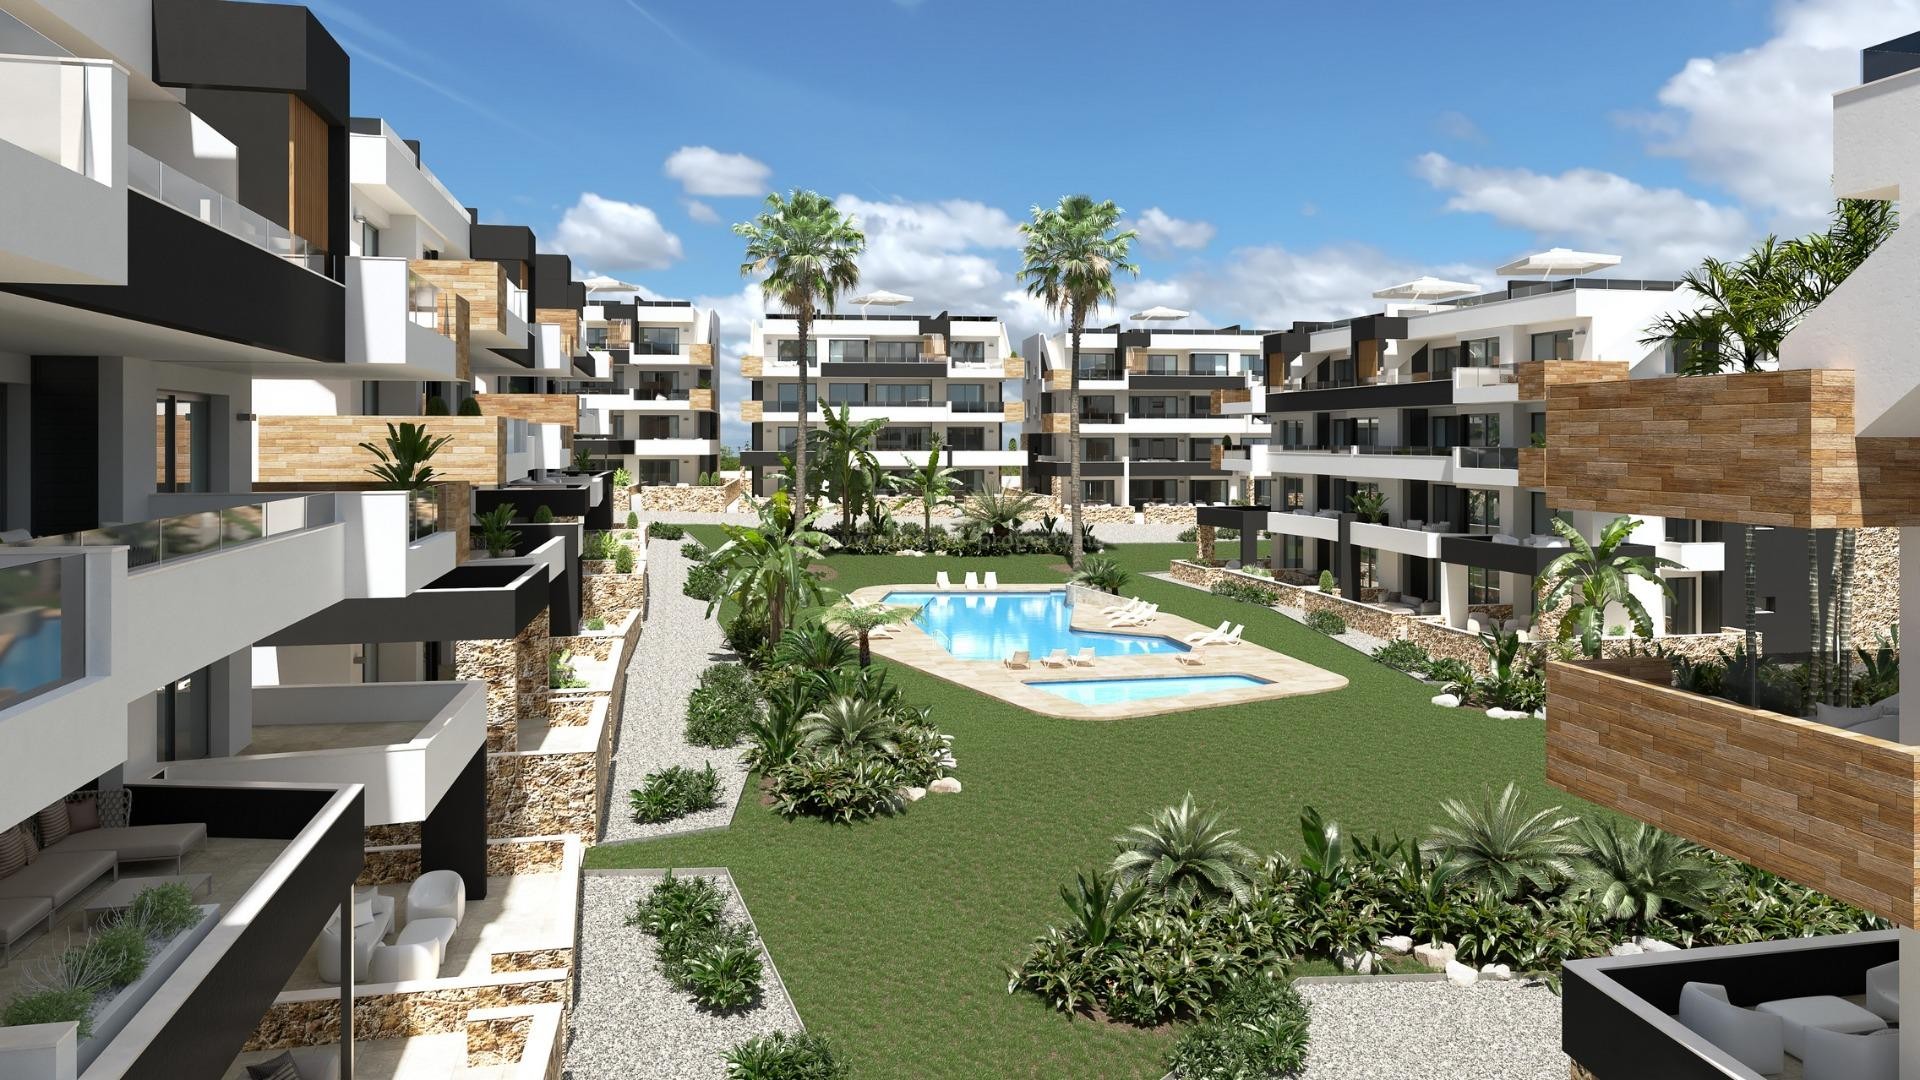 Modern apartments/penthouses in Los Altos, Orihuela Costa, 2 bedrooms, 2 bathrooms, apartments with terrace or solarium. Shared pool and gym